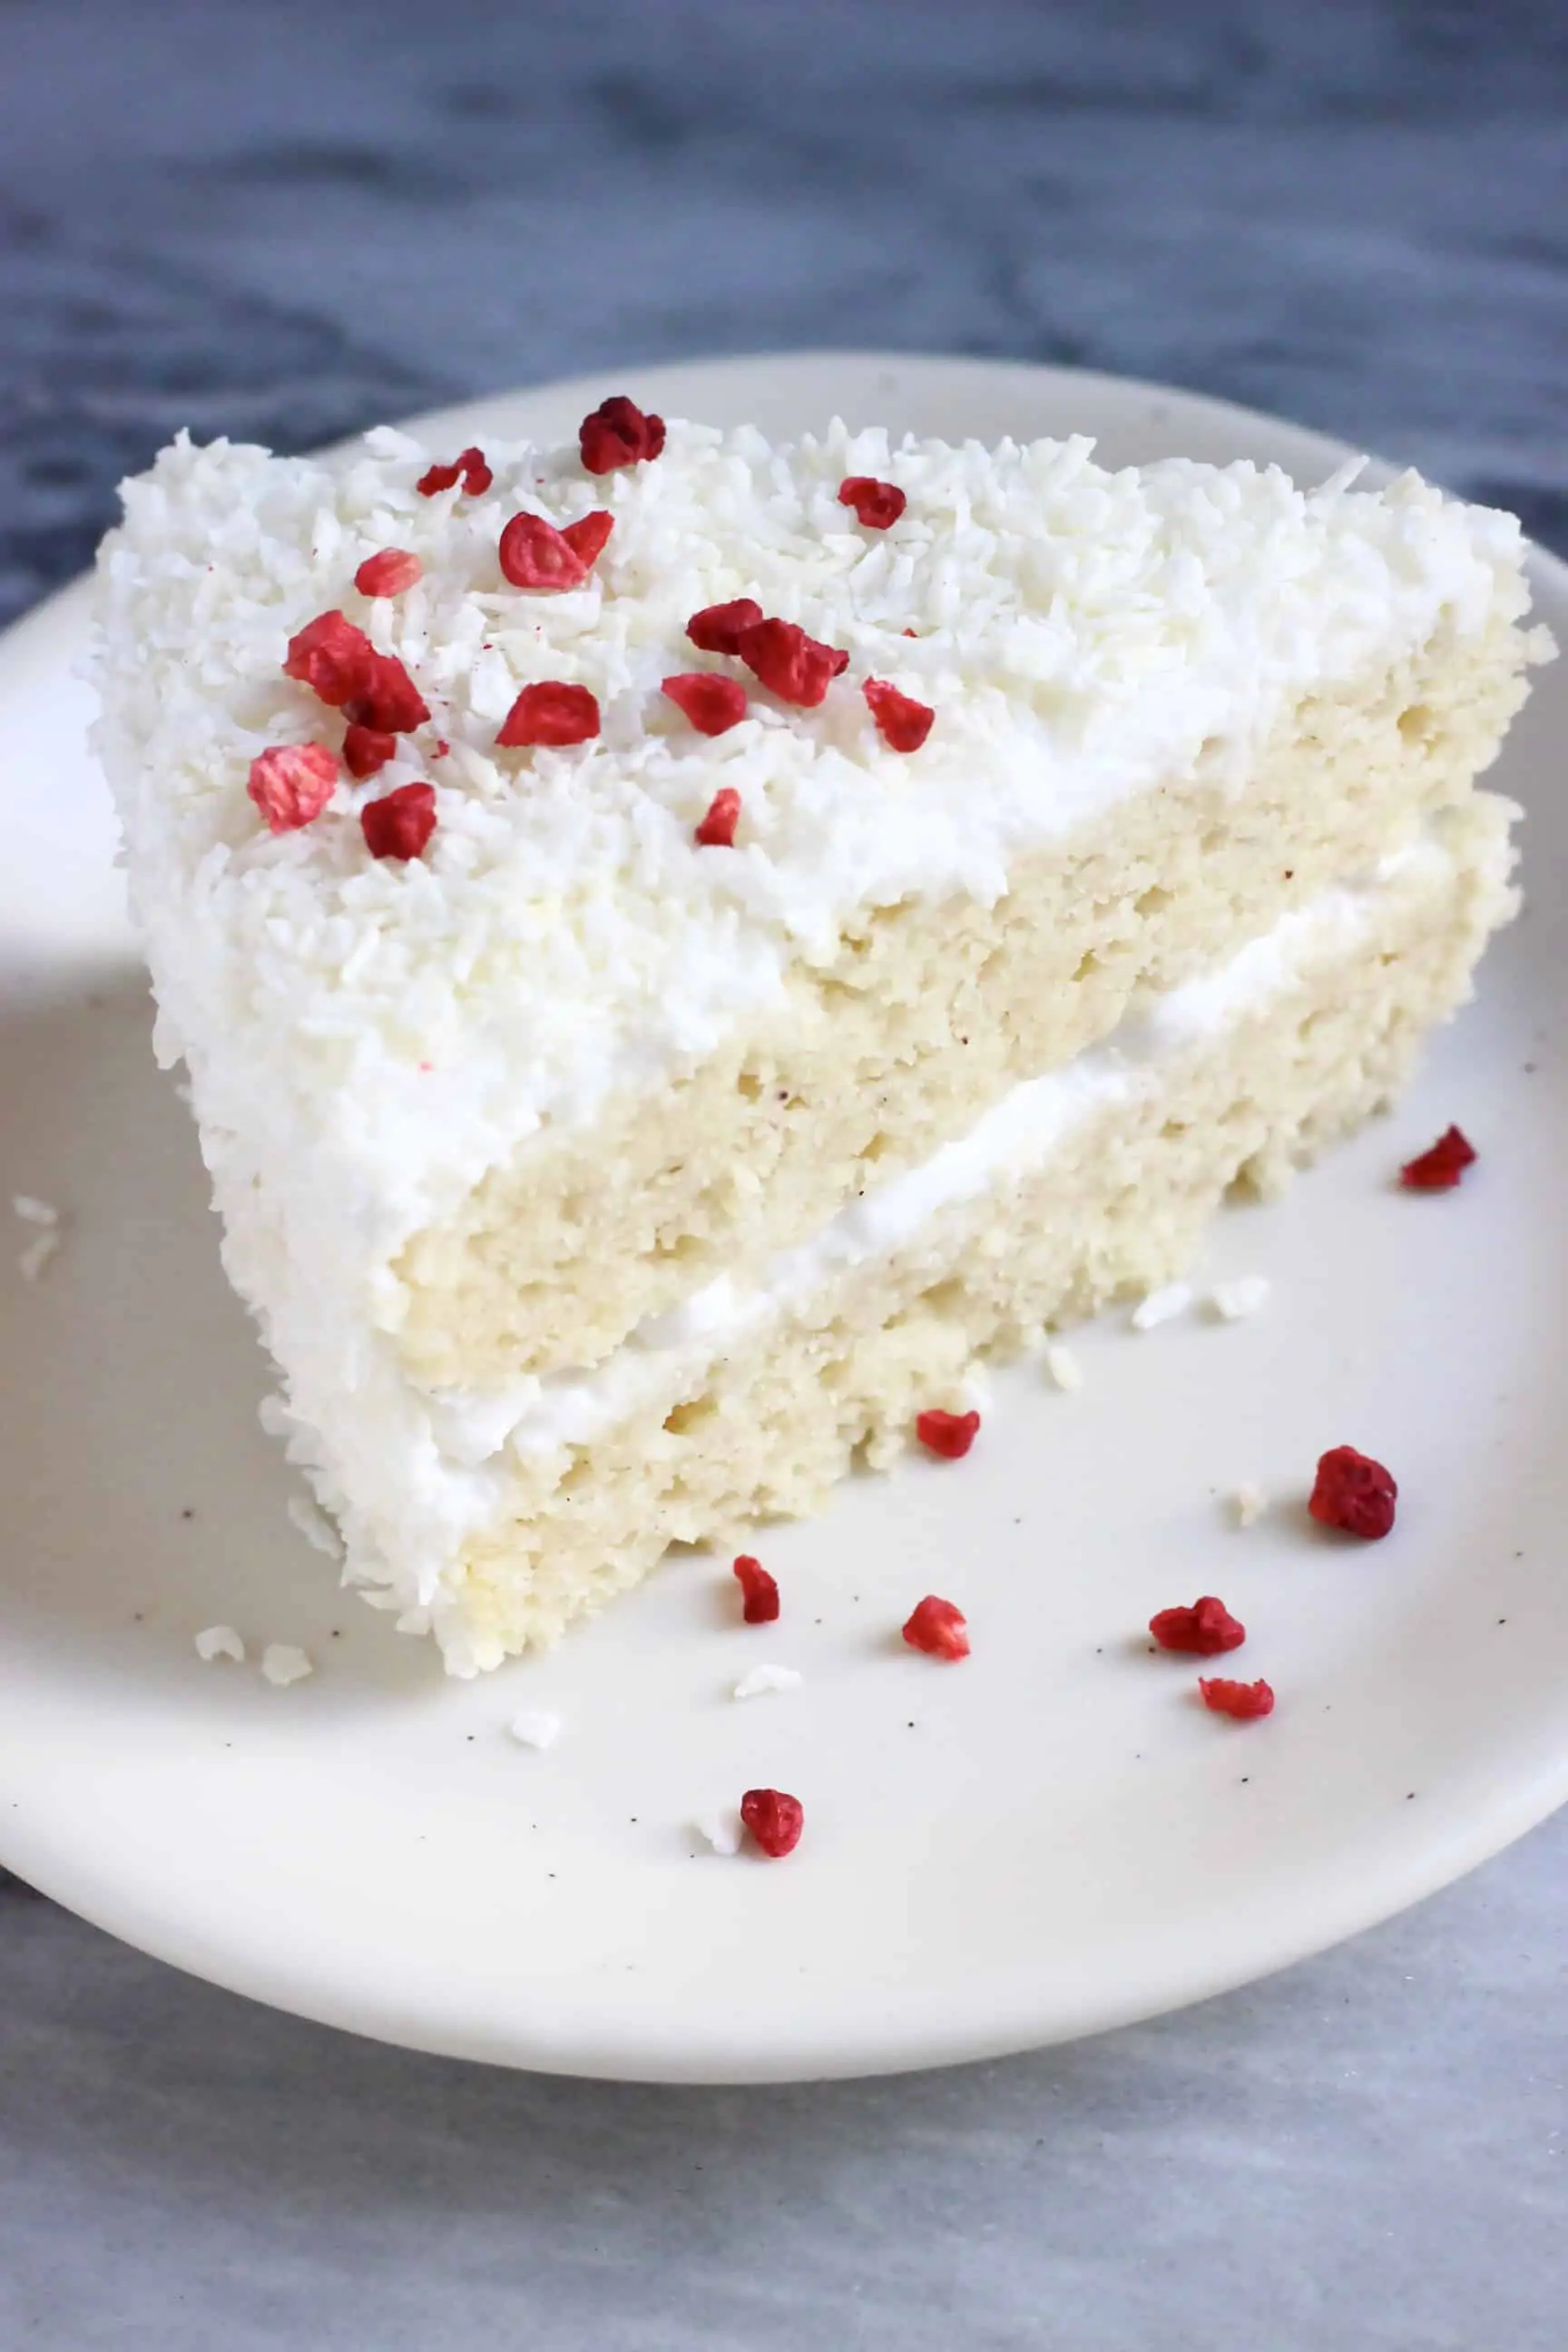 A slice of gluten-free vegan coconut cake topped with desiccated coconut and freeze-dried raspberries